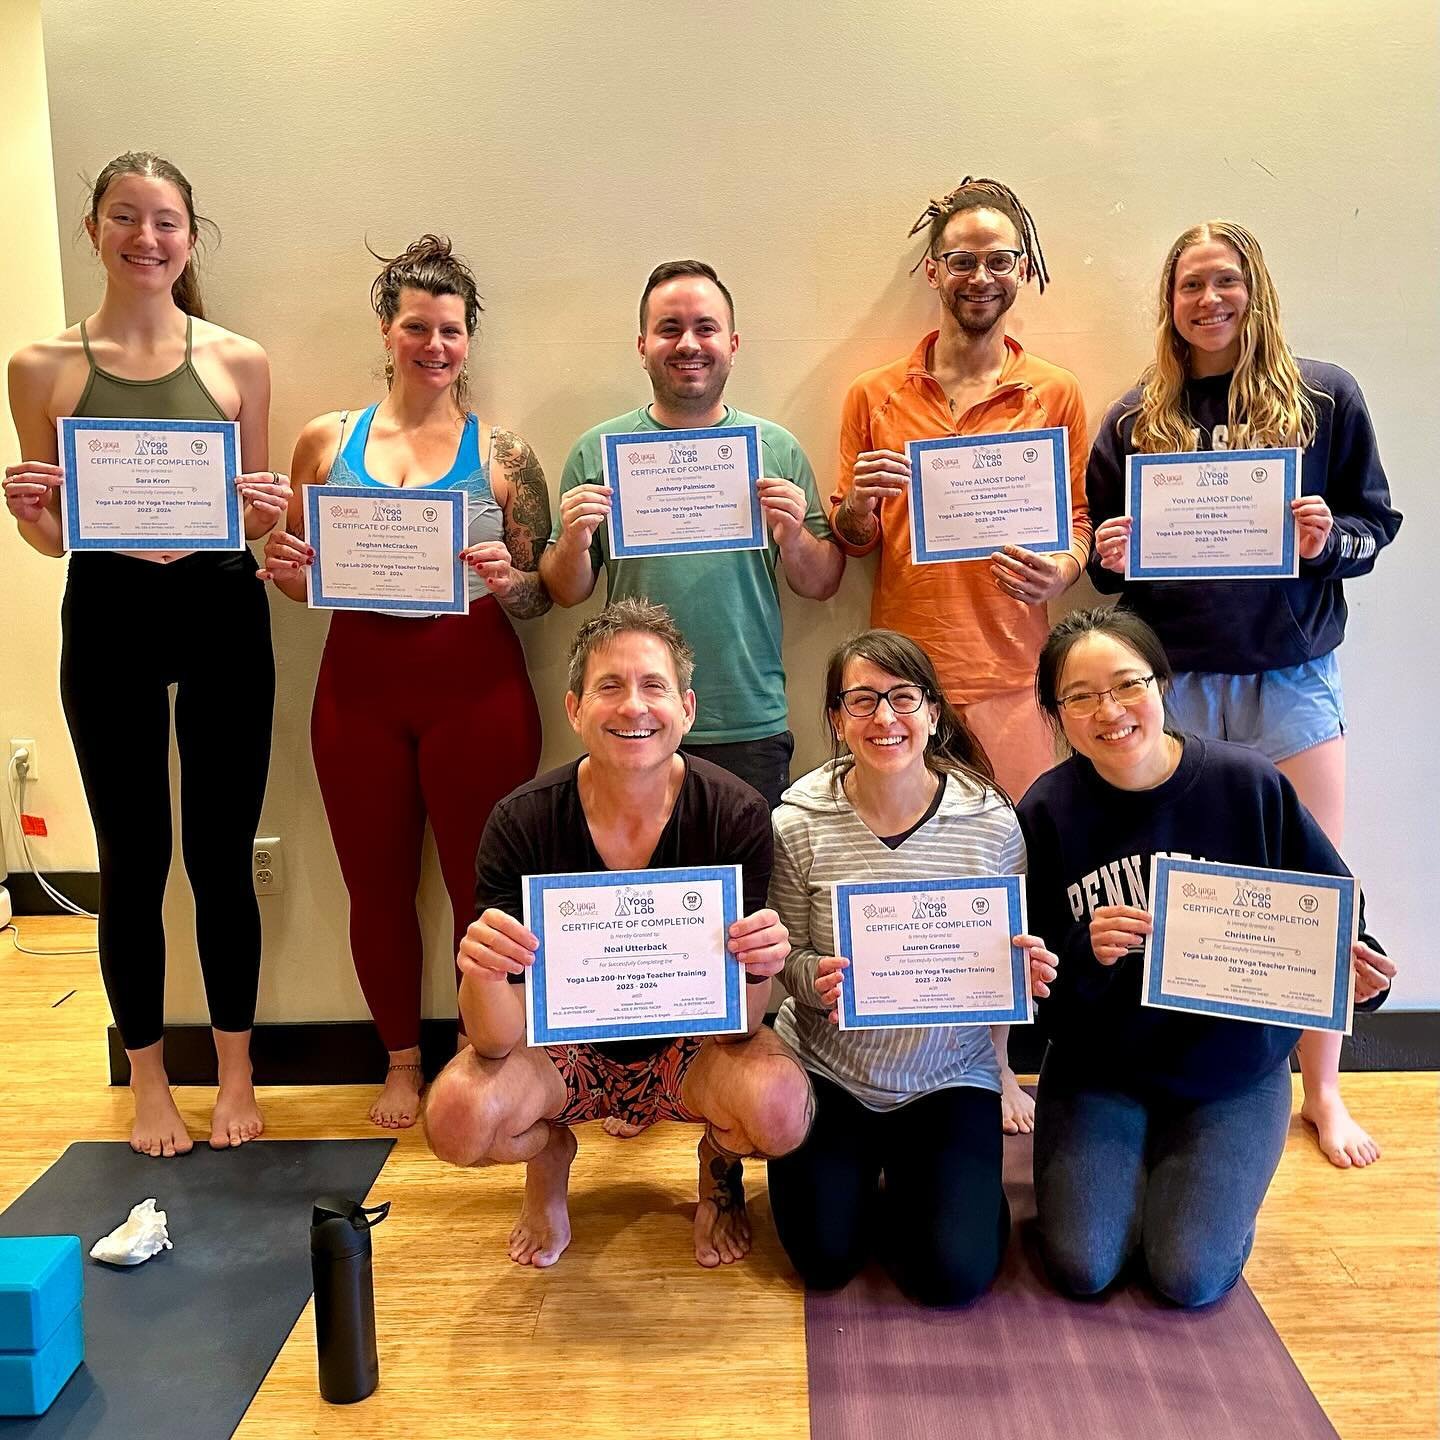 Congratulations to these AMAZING new yoga teachers who just graduated from our 200-Hr Yoga Teacher Training!!!!!! Give them a shoutout when you see them at the studio! 
🥳🎉🤩💕🙏

We&rsquo;re SO excited for this awesome crew and so proud of everythi